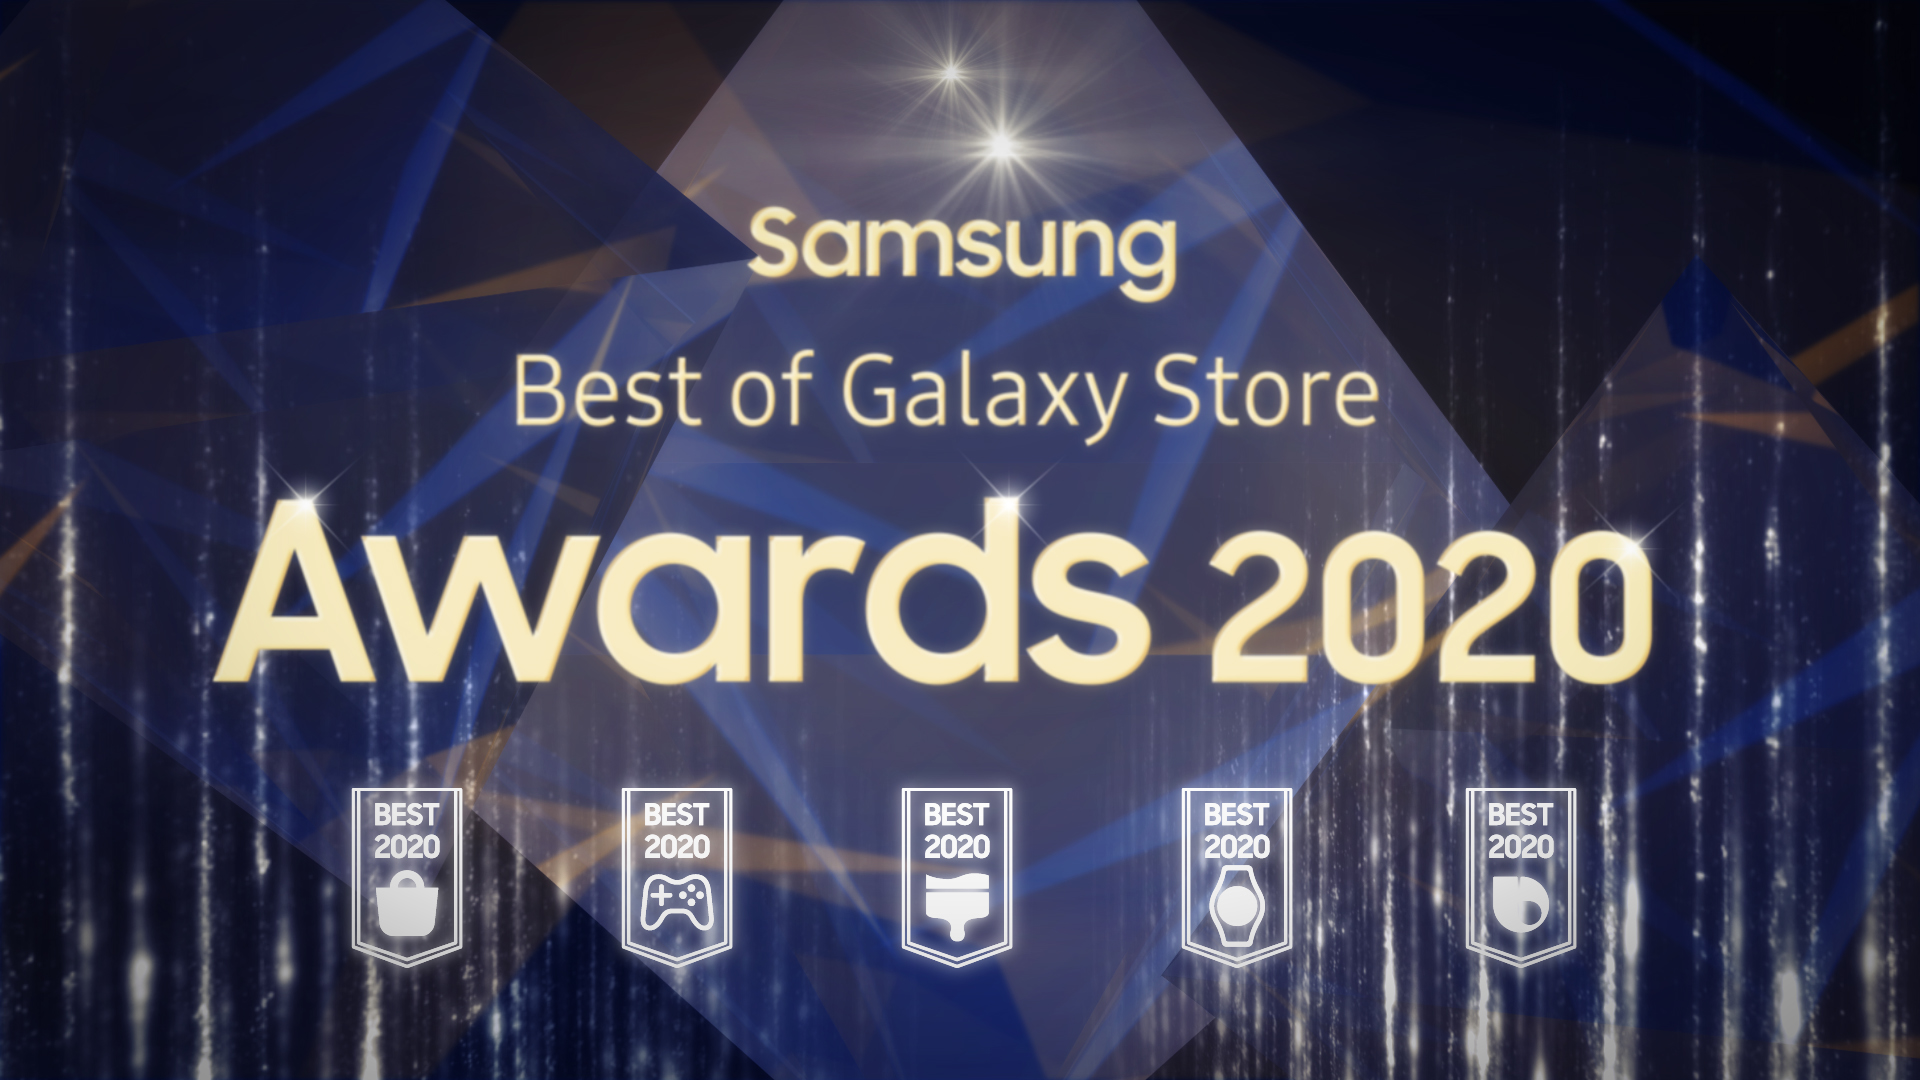 2020 Best of Galaxy Store Awards banner